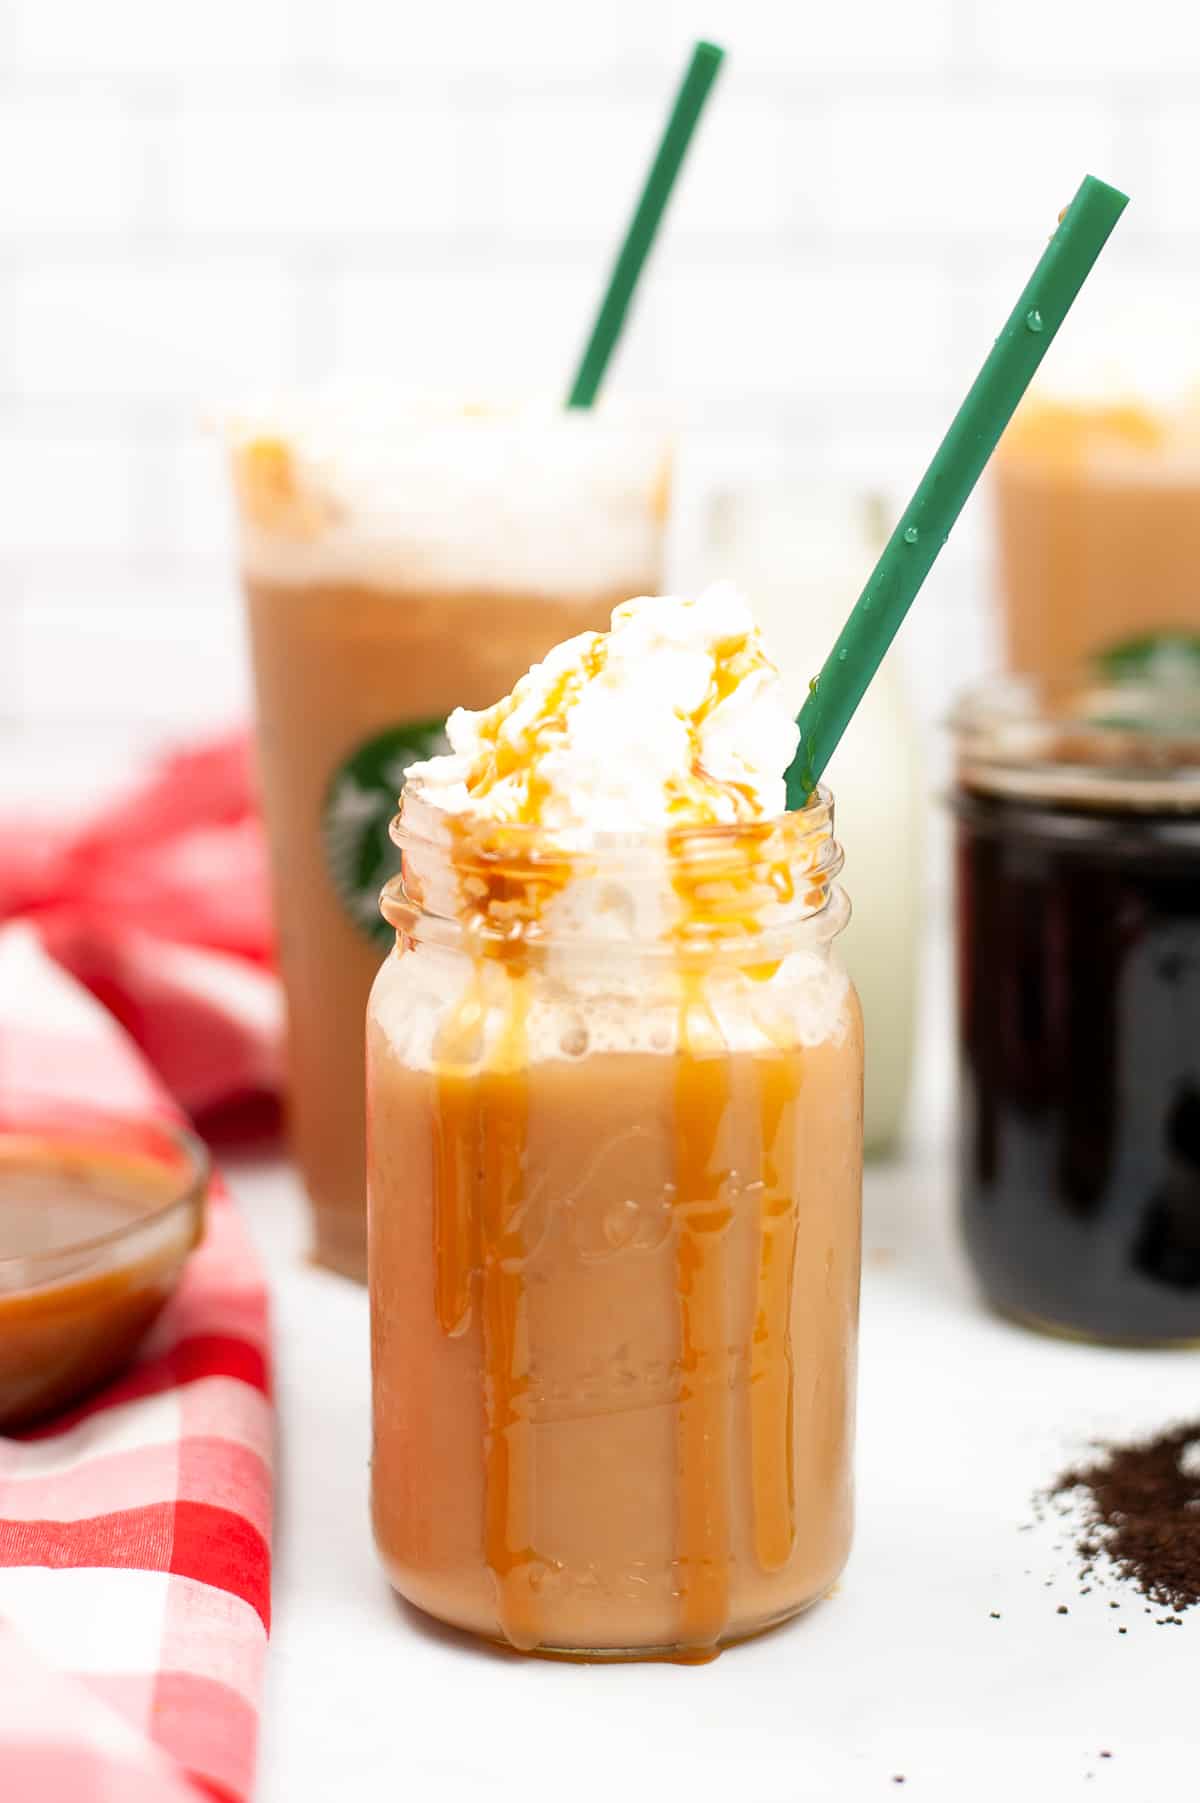 Caramel Frappuccino topped with whipped cream and caramel drizzle served in a mason jar with green straw